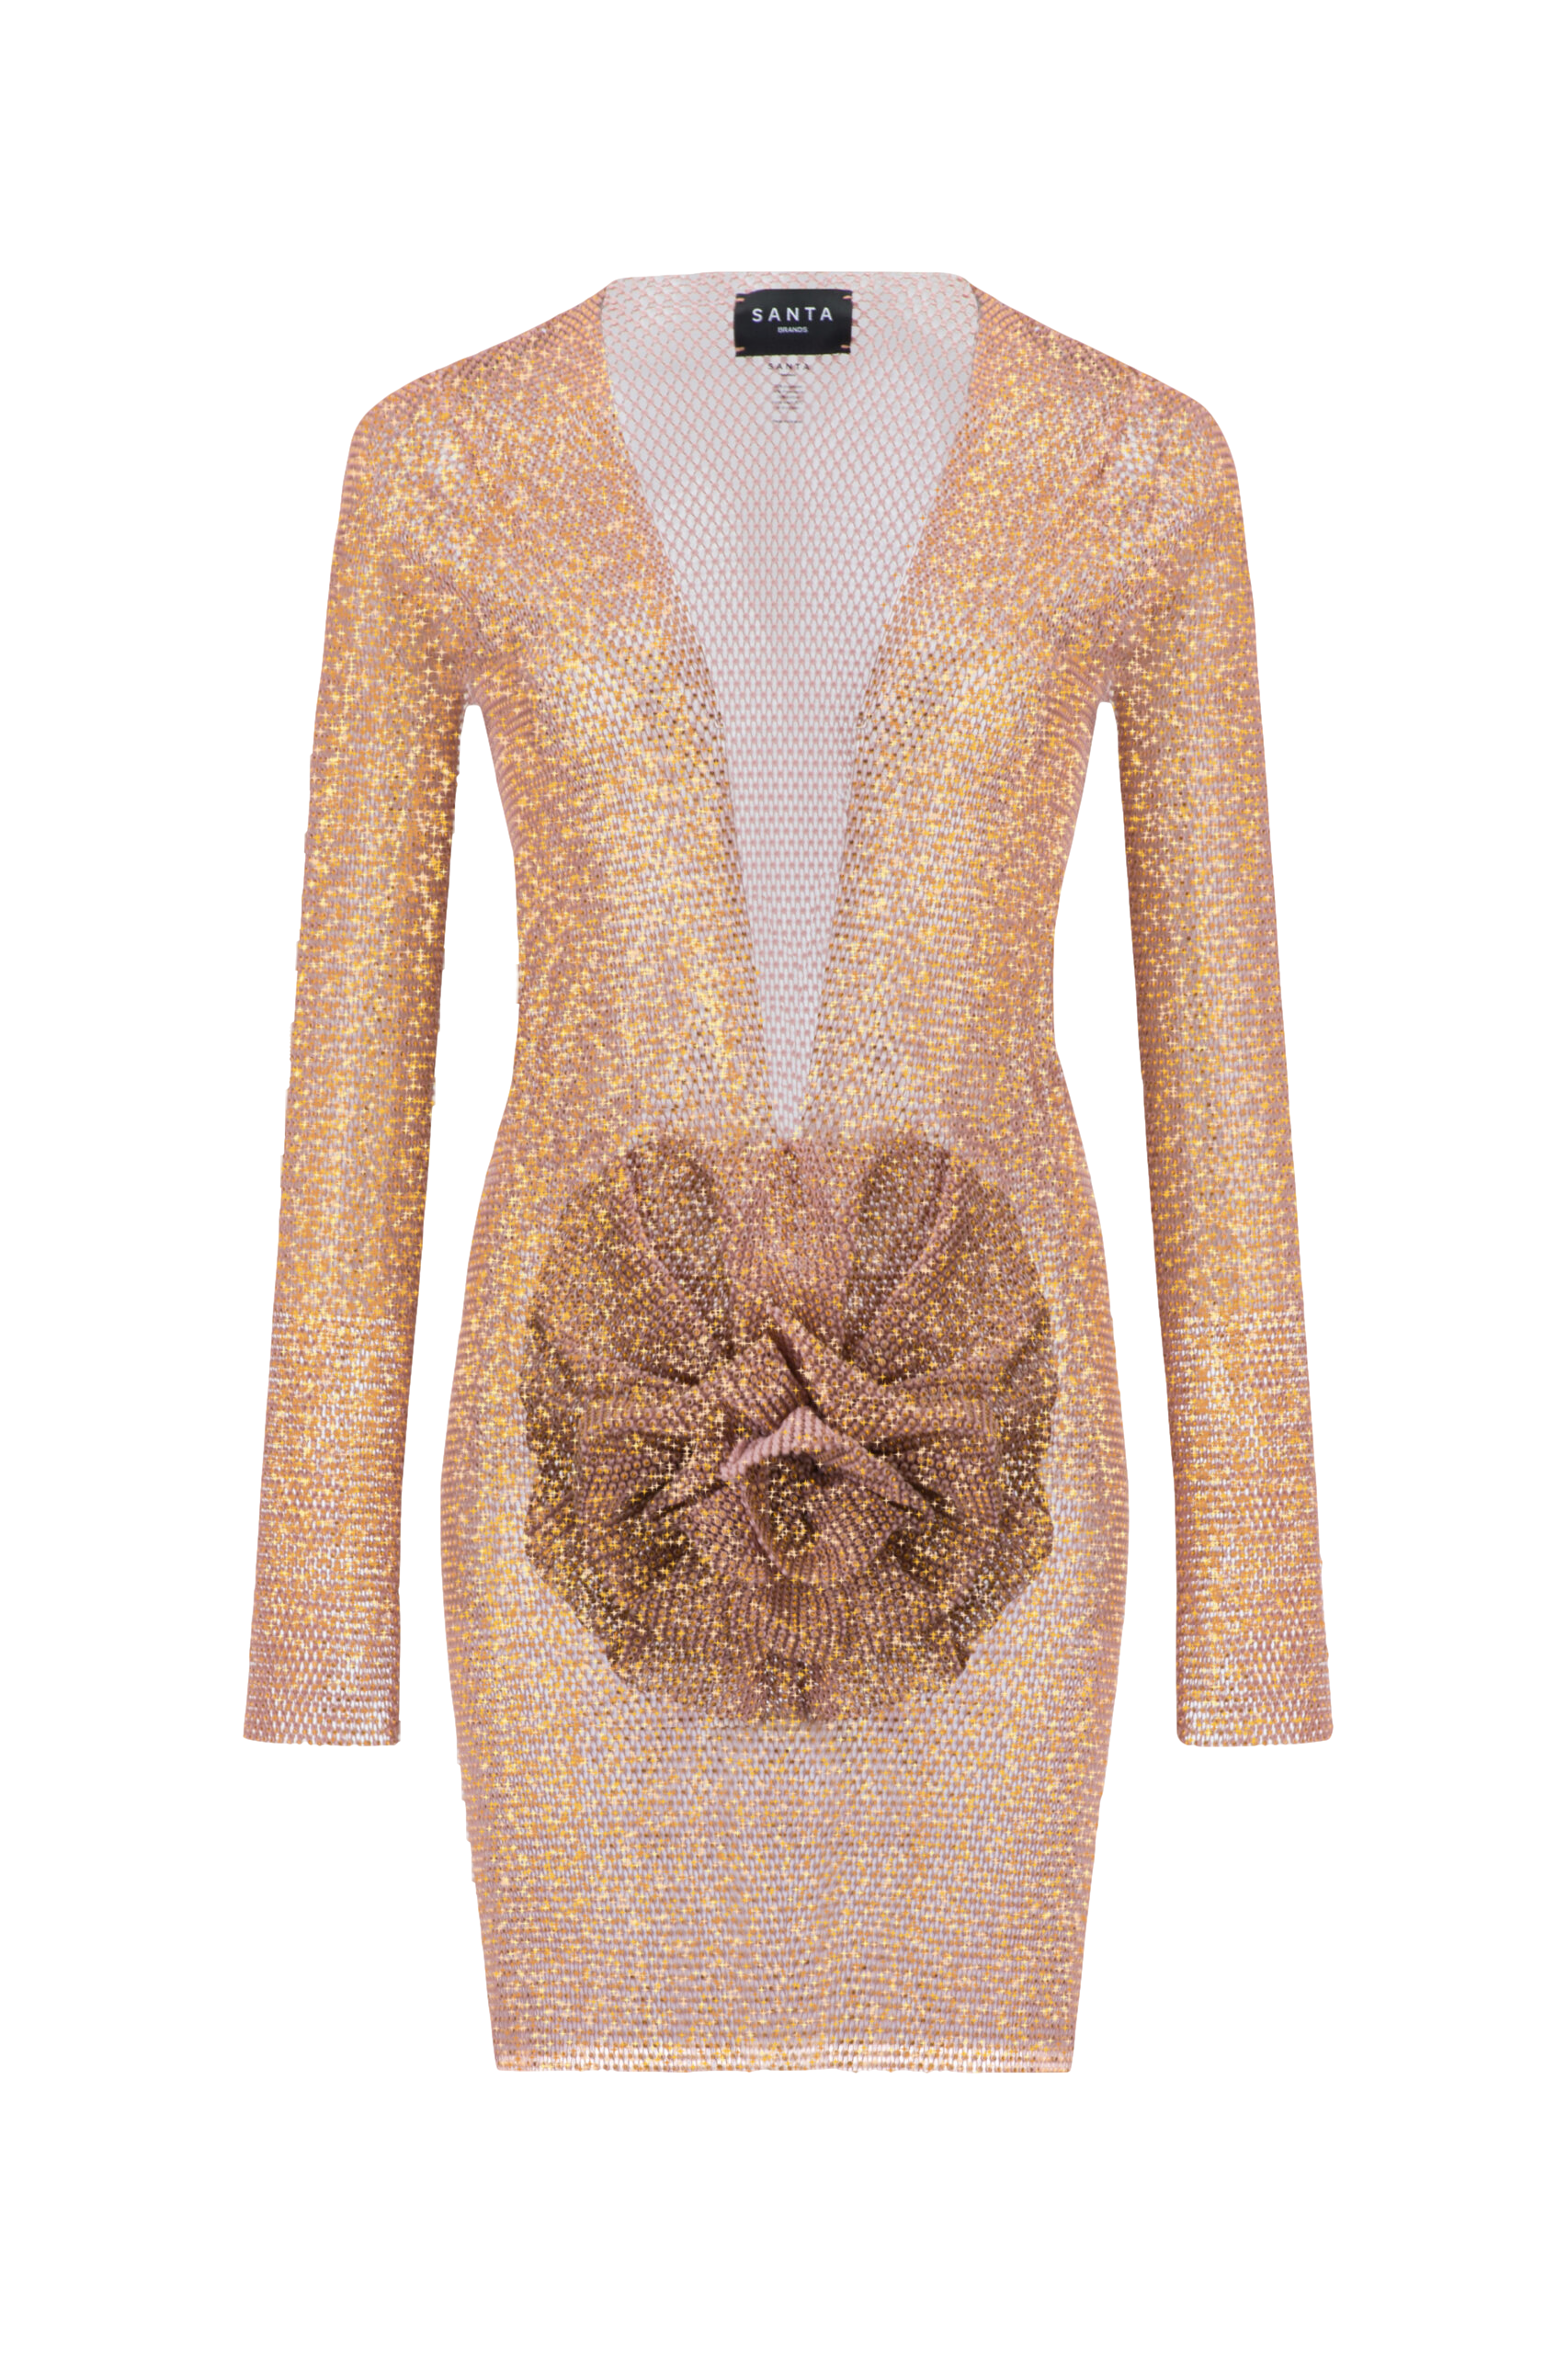 Shop Sparkle Beige Mini Dress with Flower from Santa Brands at